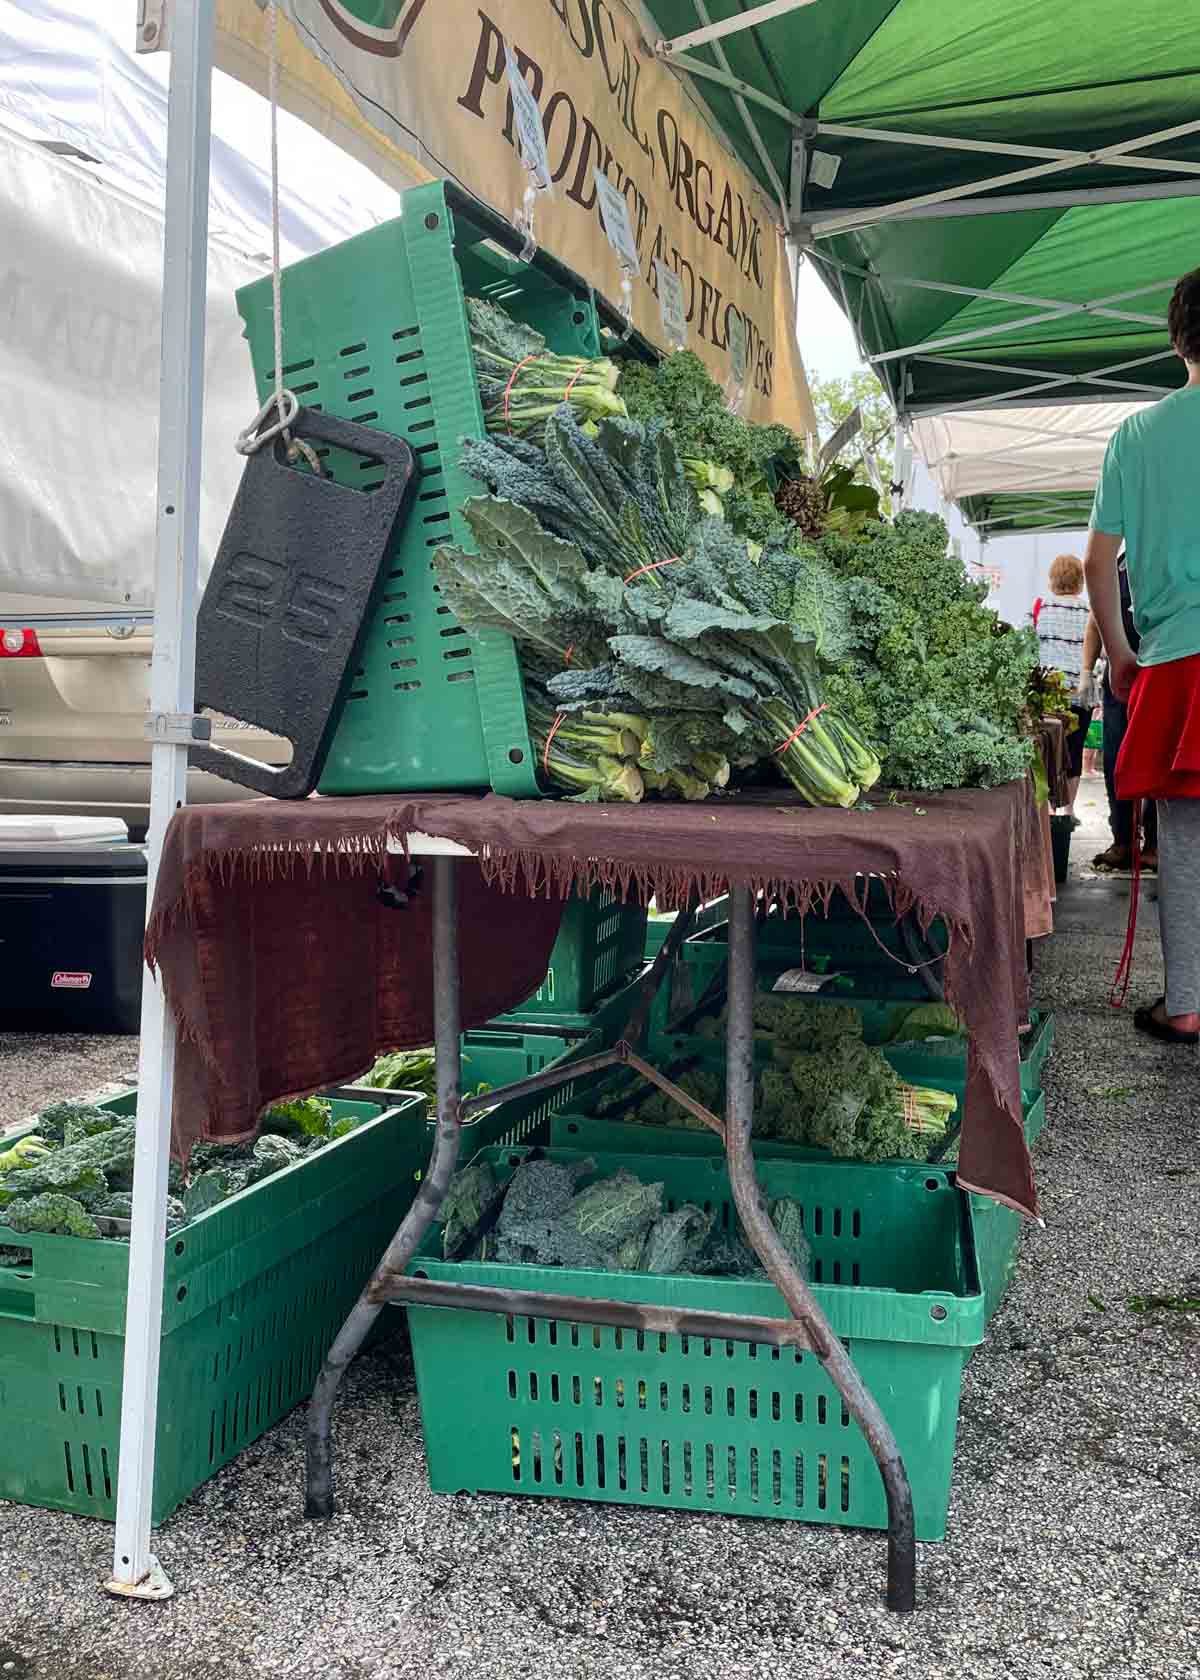 Example of a real farmer at the farmers market with reusable containers for their produce.